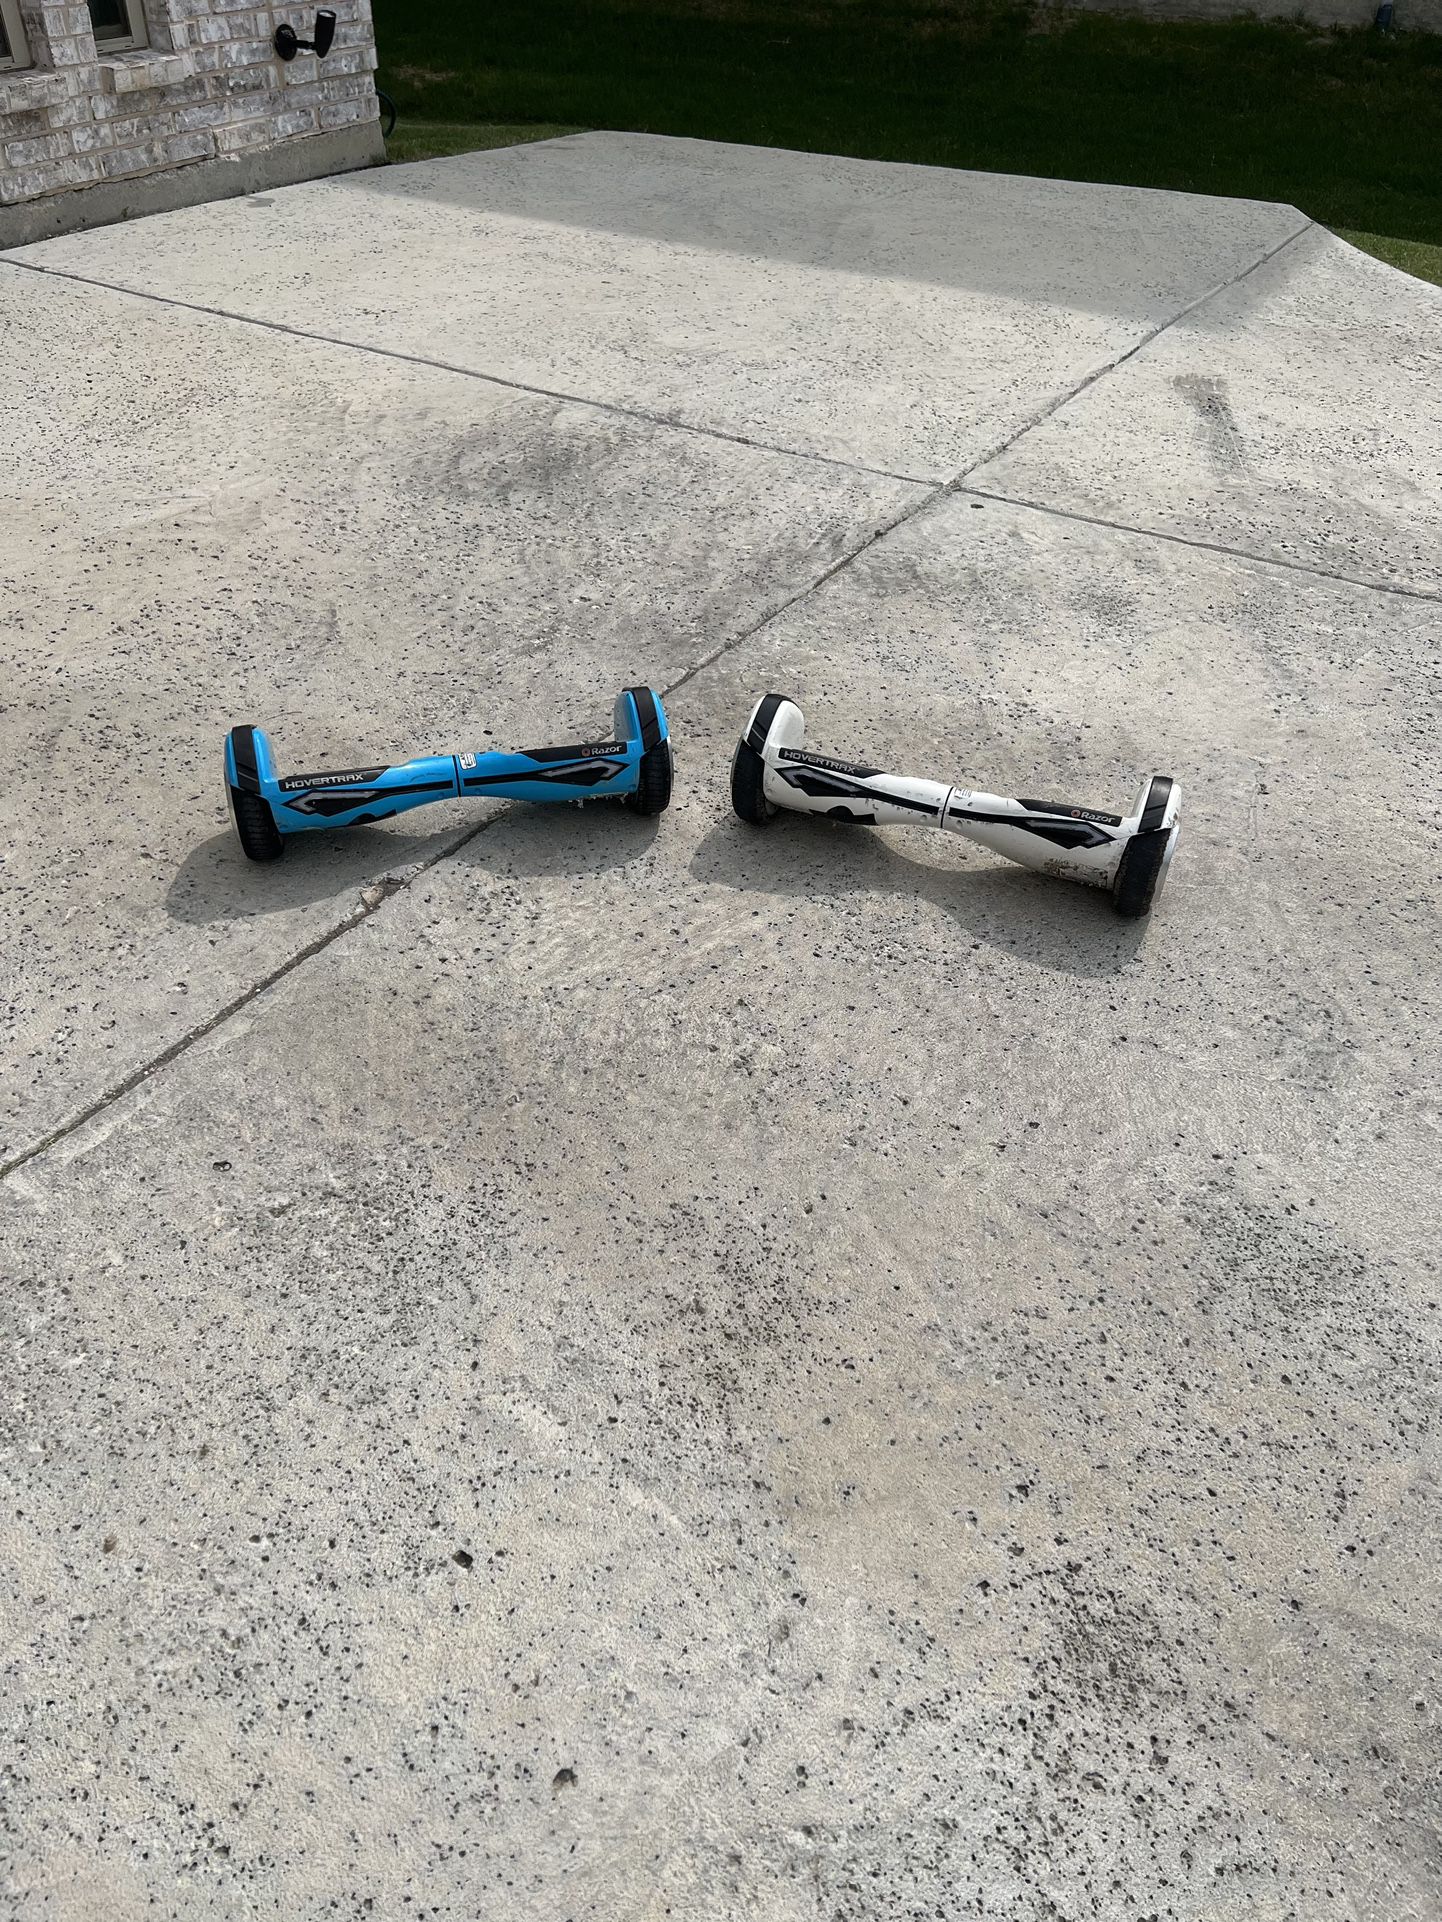 Razor Hoverboards Both For $100 With Chargers